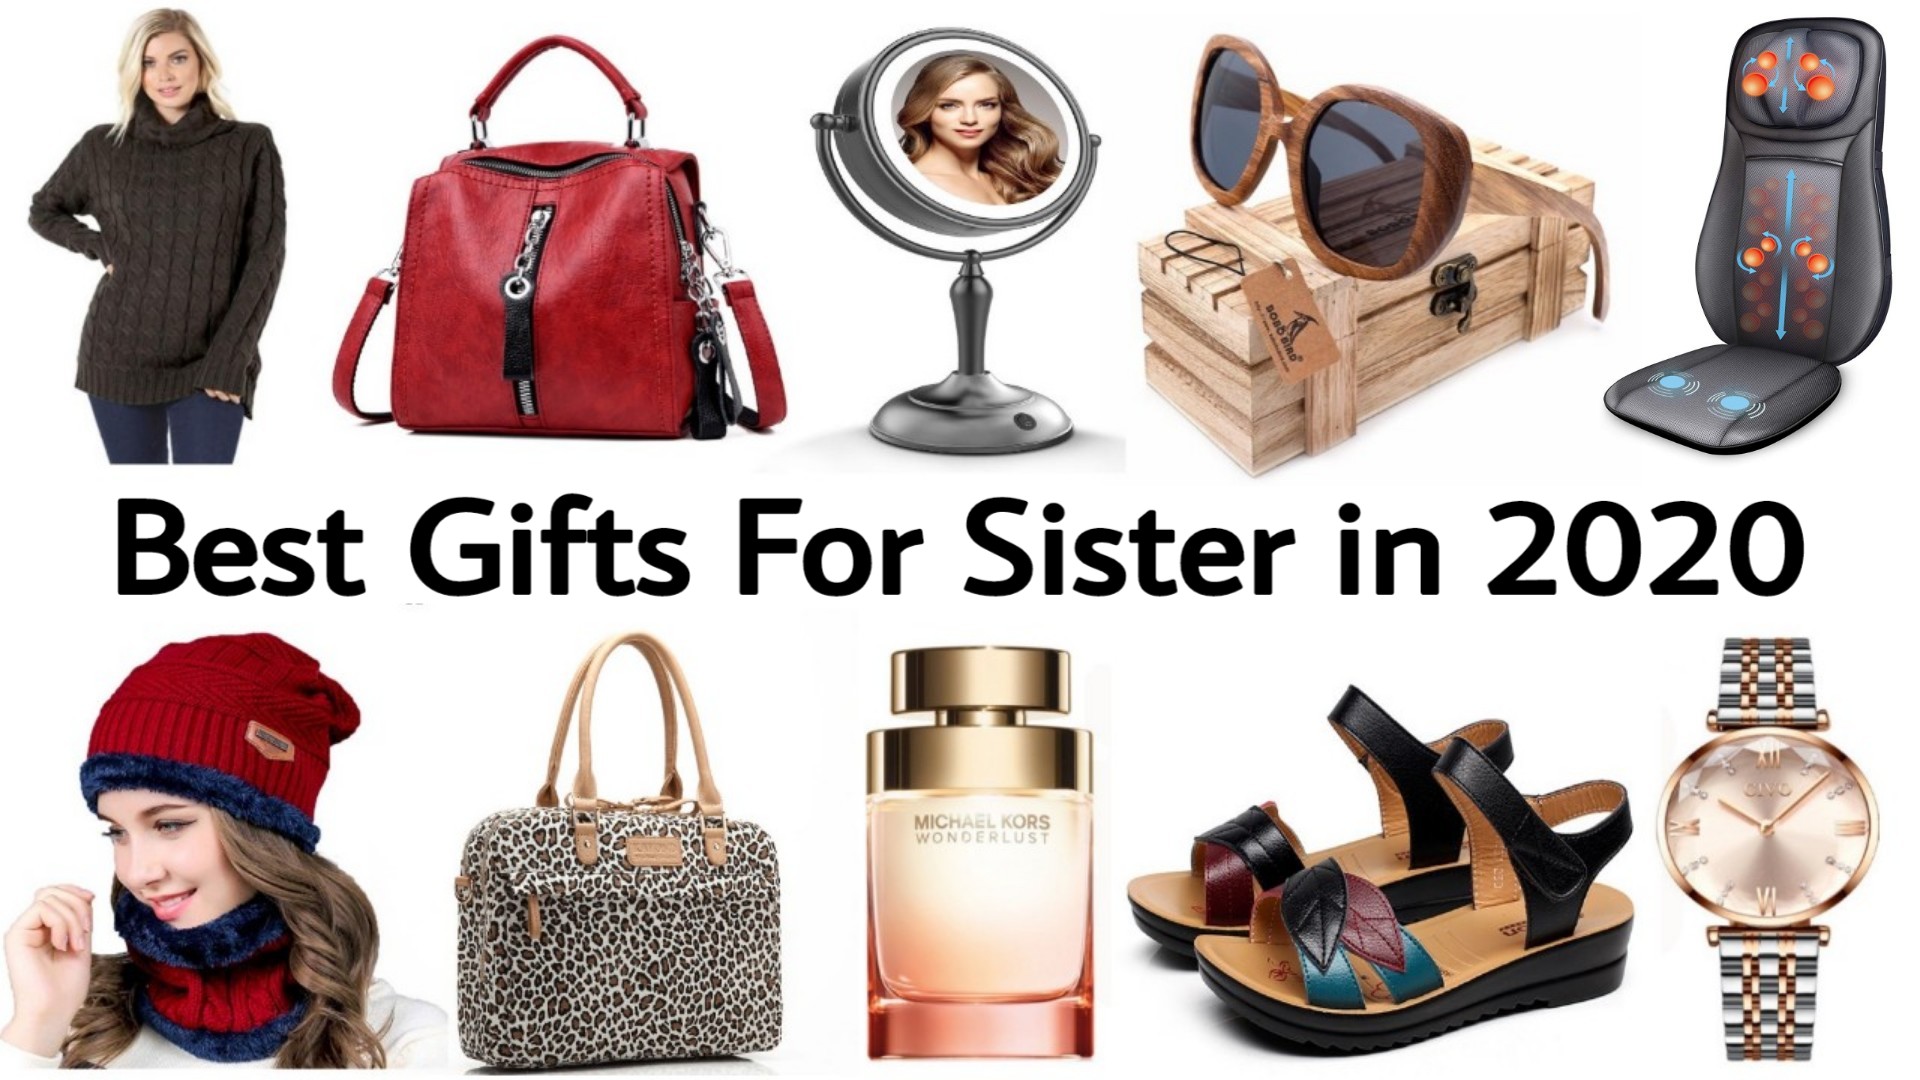 Best Christmas Gifts For Her 2021: Bloom & Wild To John